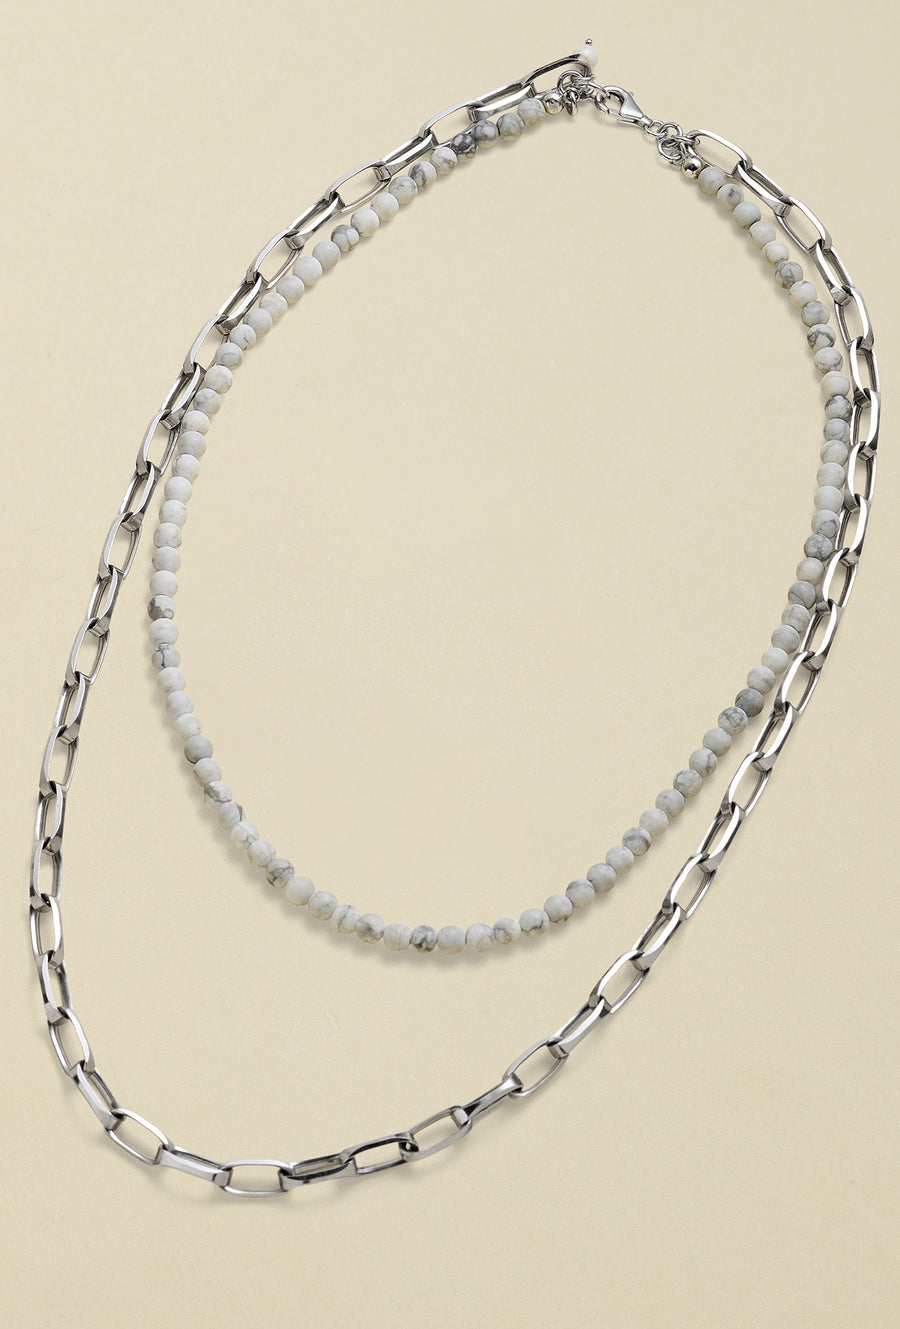 Howlith and Silver Necklace II